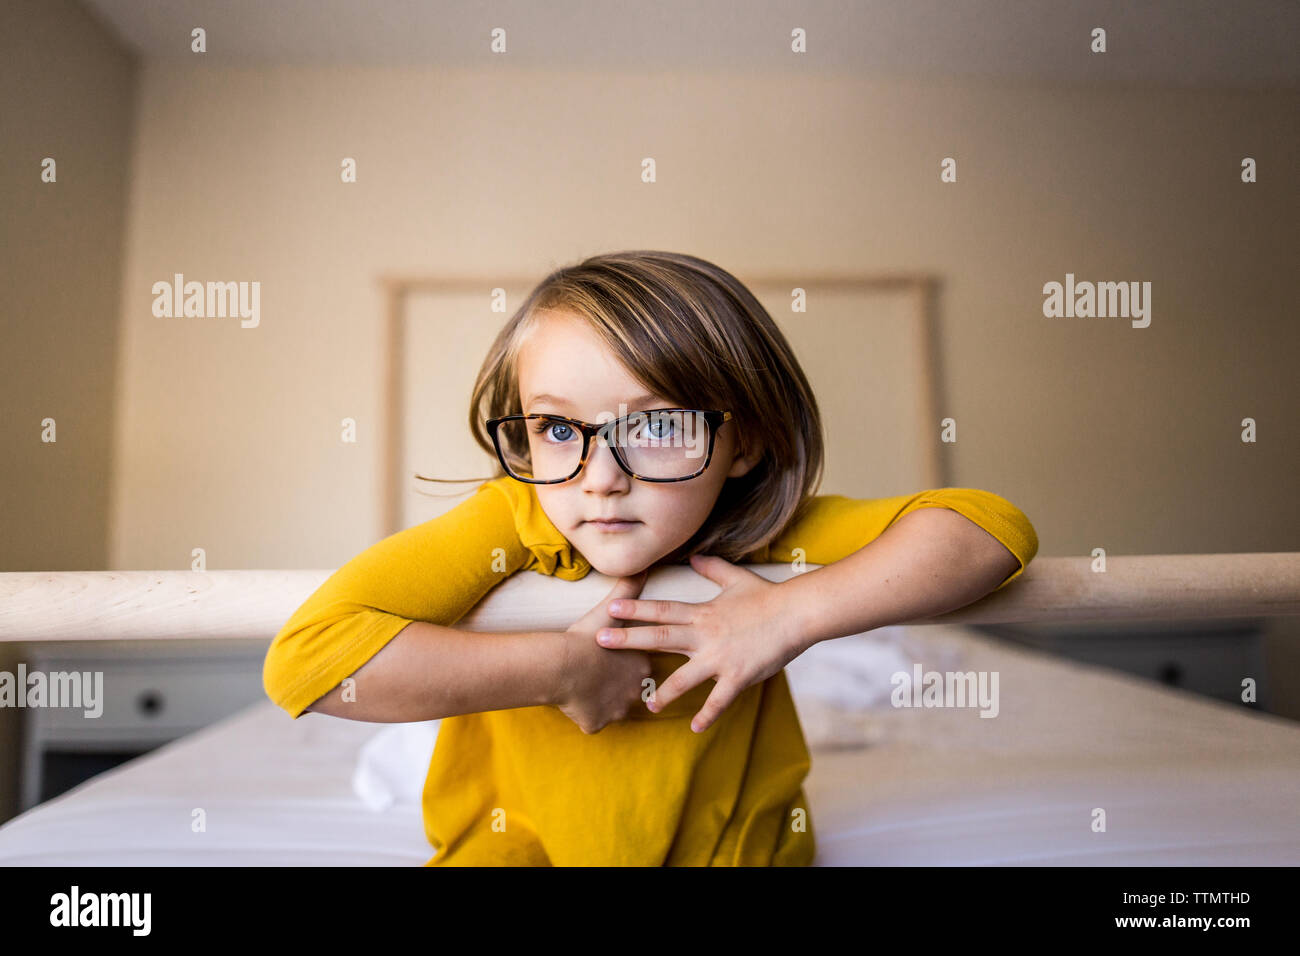 Young girl with glasses and yellow dress sitting on bed Stock Photo